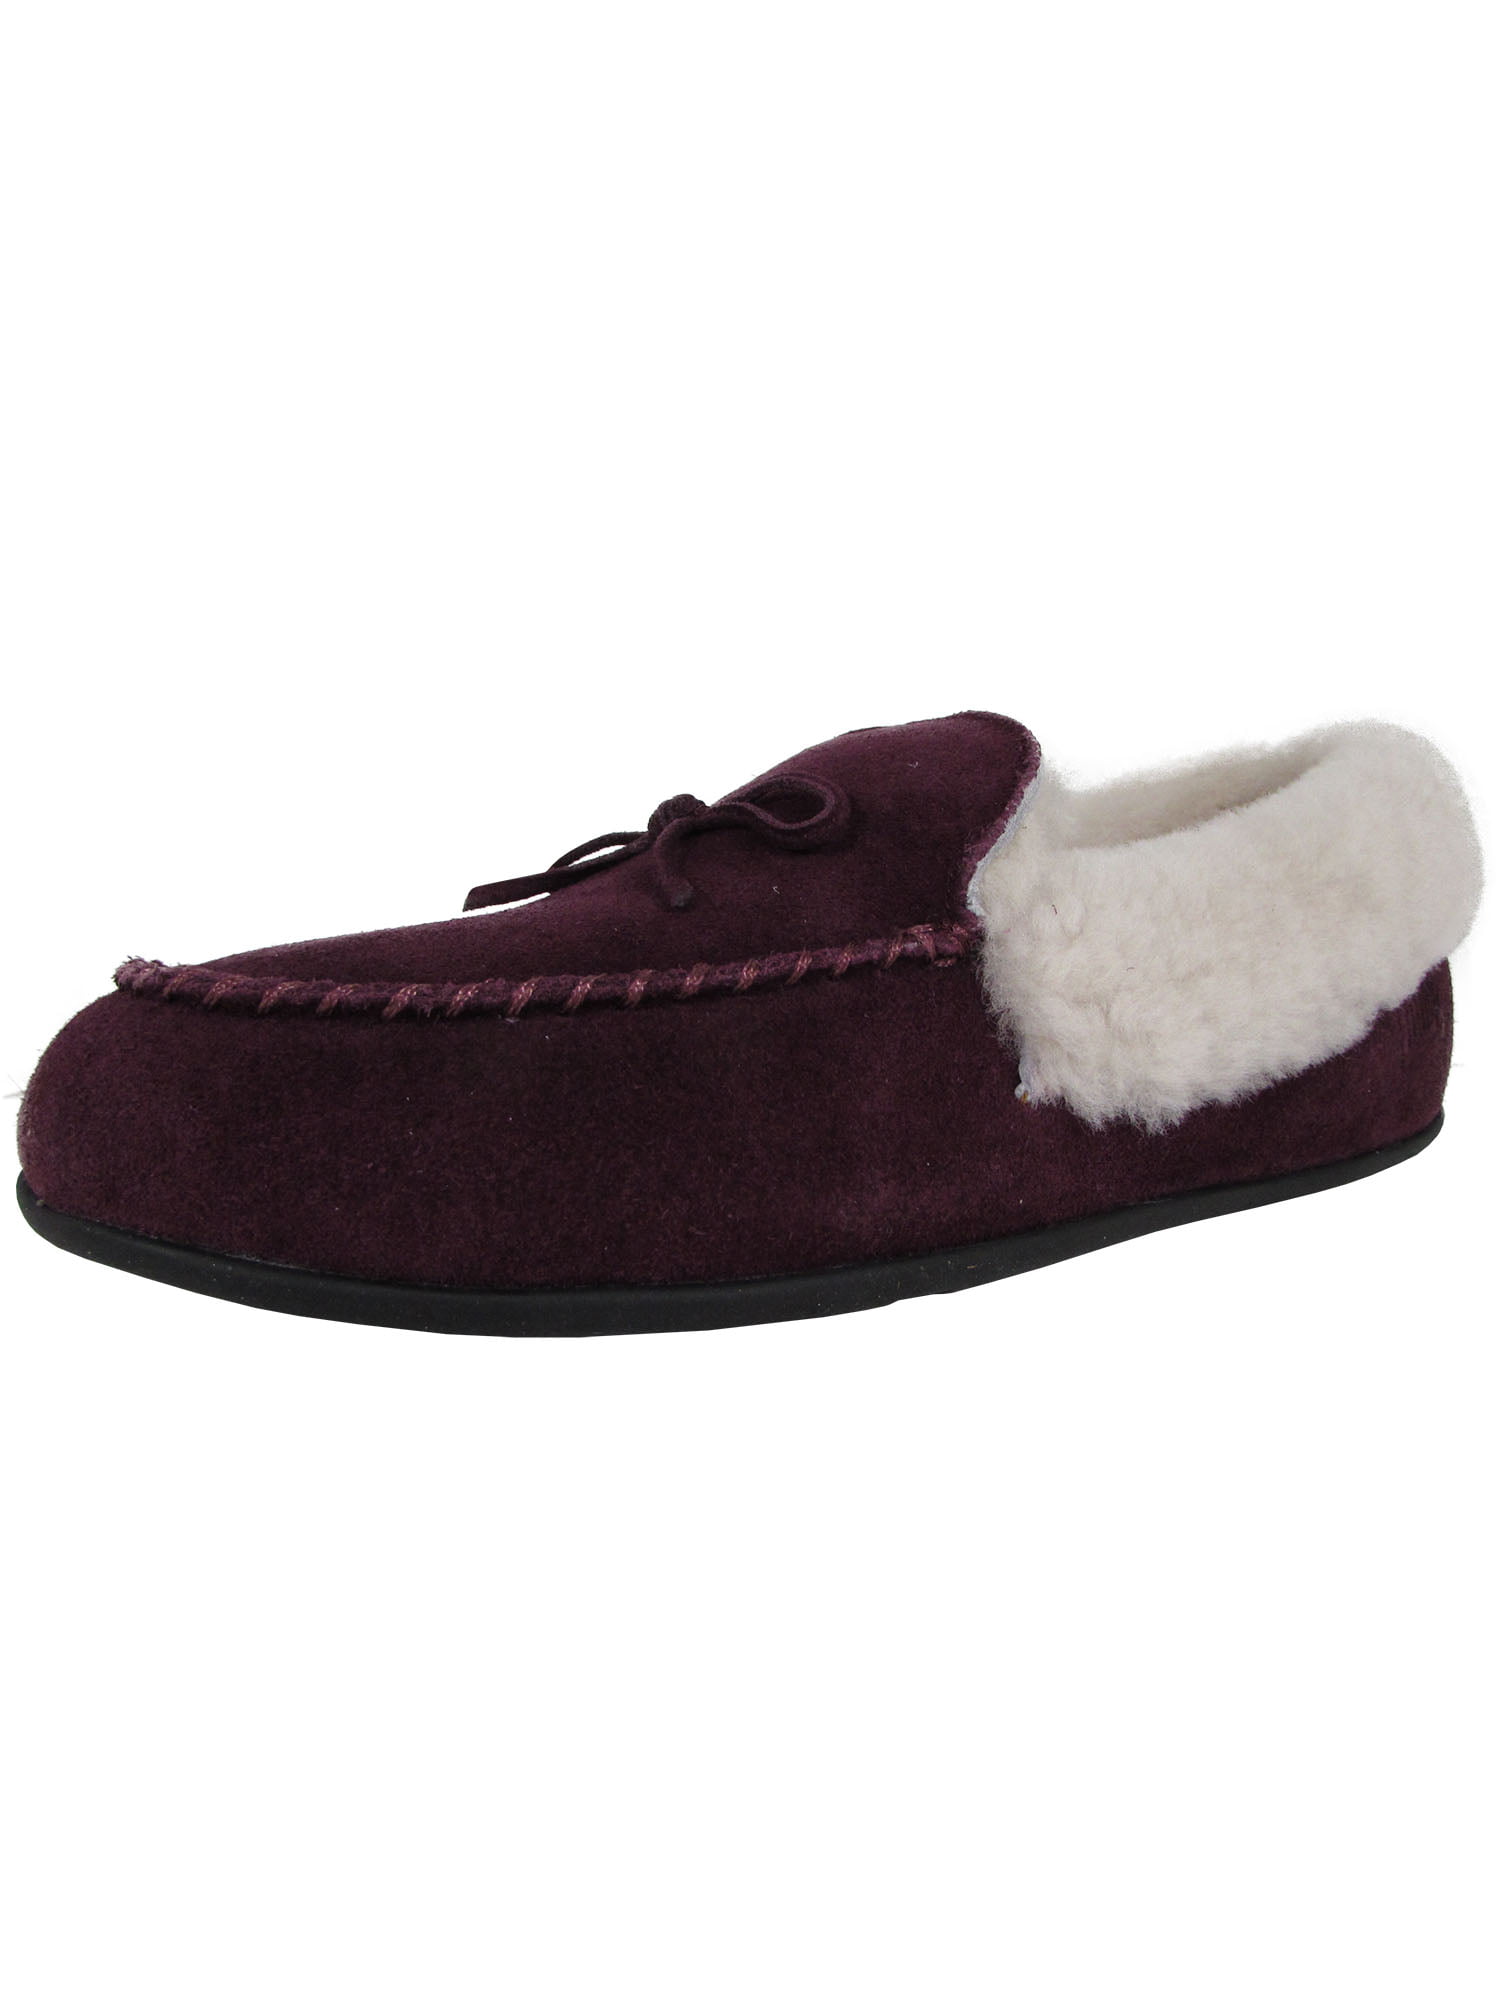 fitflop suede